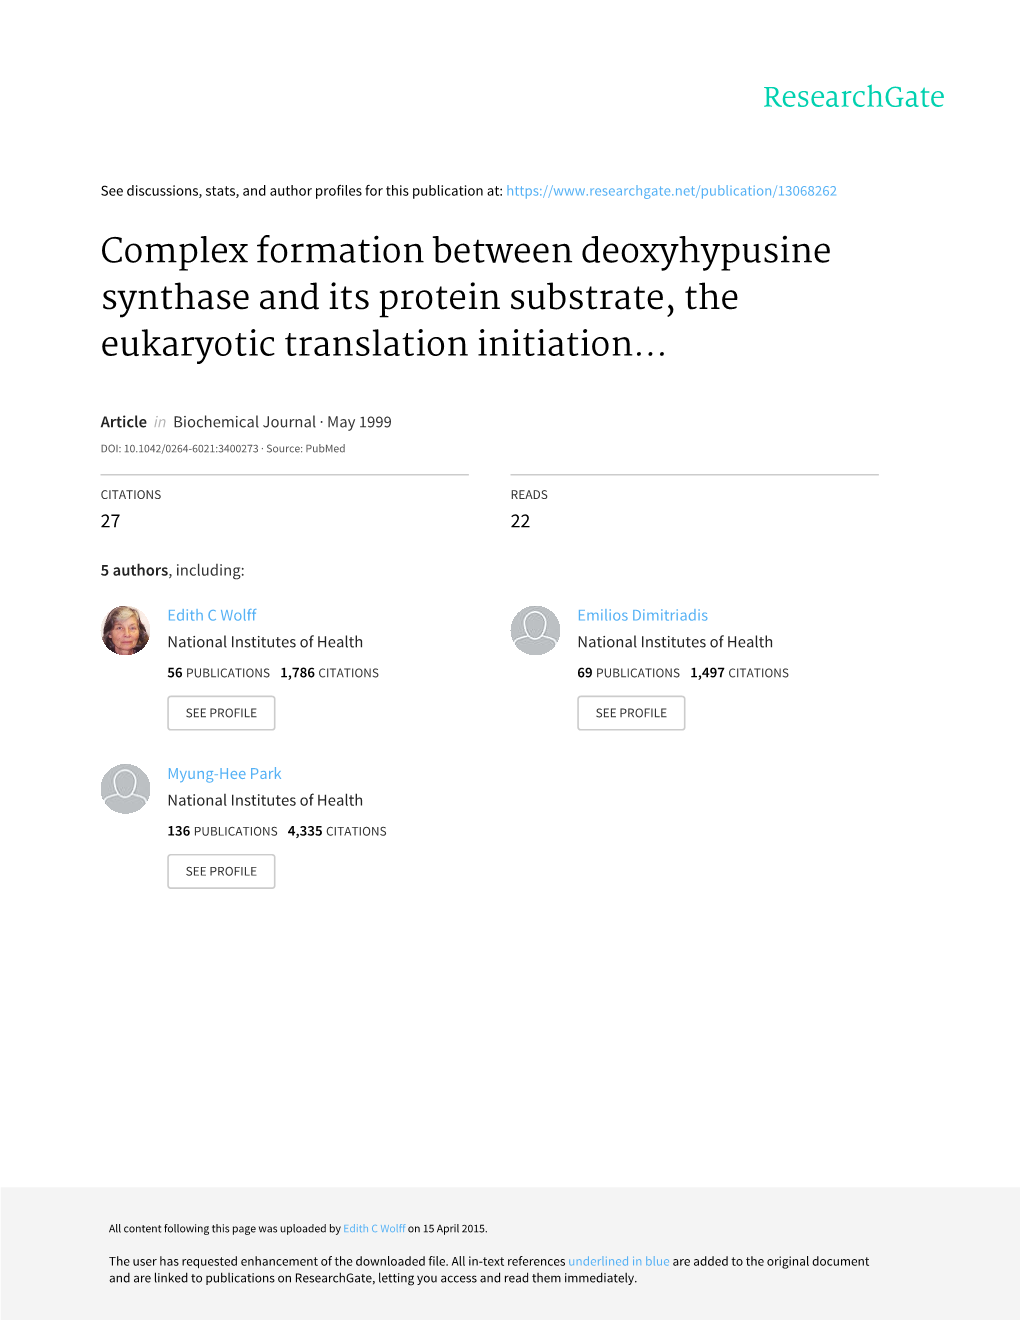 Complex Formation Between Deoxyhypusine Synthase and Its Protein Substrate, the Eukaryotic Translation Initiation